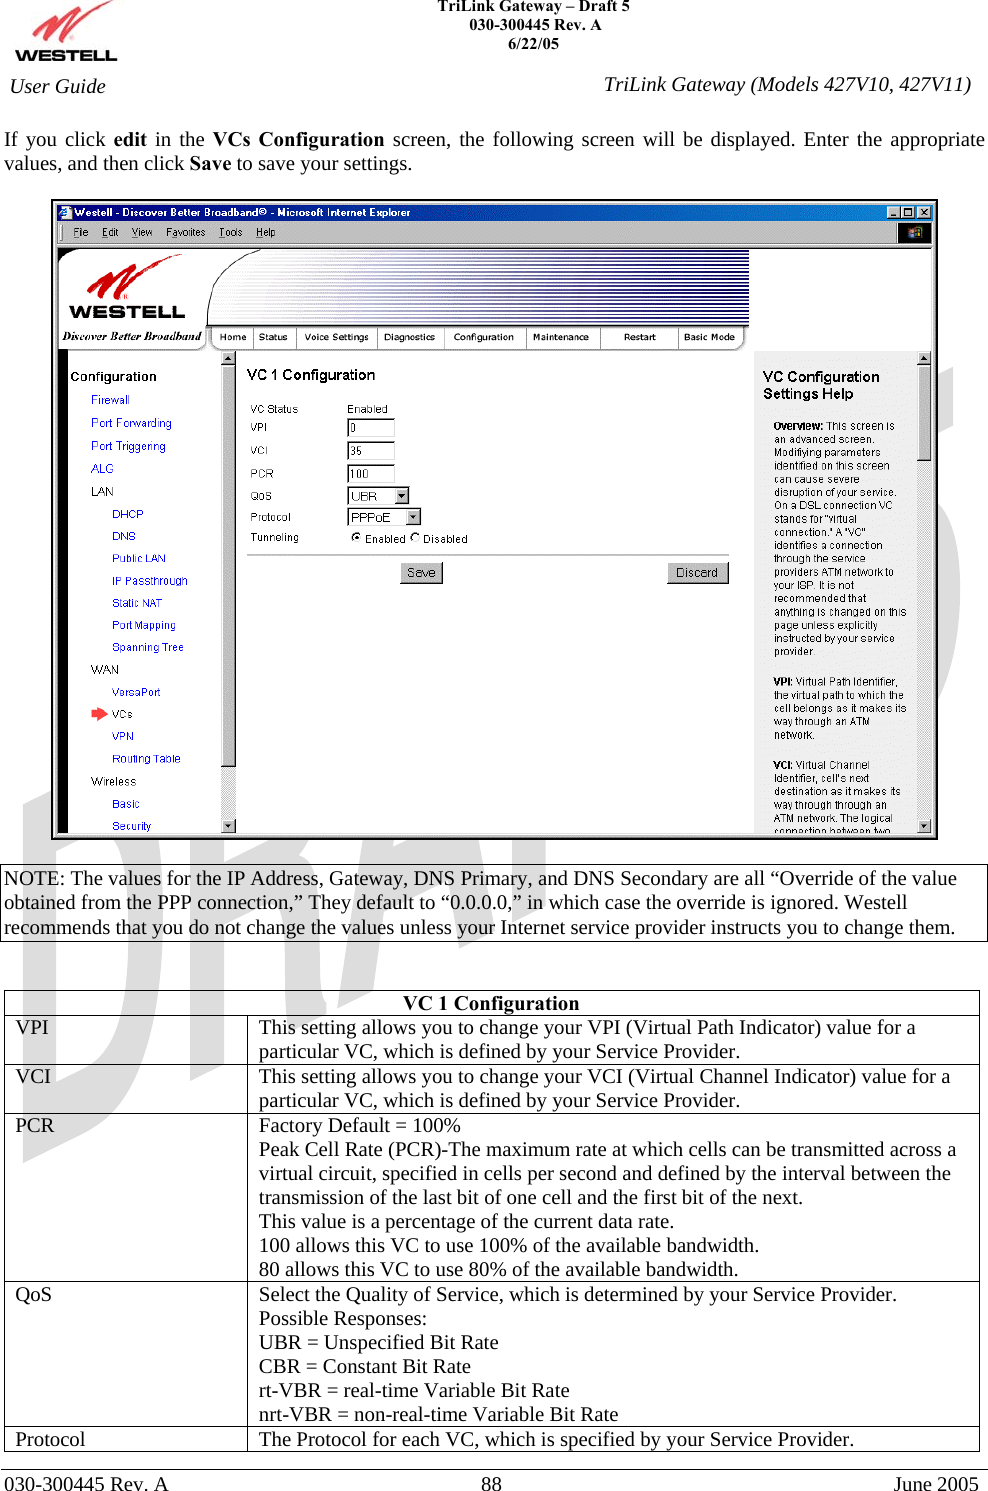    TriLink Gateway – Draft 5   030-300445 Rev. A 6/22/05   030-300445 Rev. A  88  June 2005  User Guide  TriLink Gateway (Models 427V10, 427V11)If you click edit in the VCs Configuration screen, the following screen will be displayed. Enter the appropriate values, and then click Save to save your settings.    NOTE: The values for the IP Address, Gateway, DNS Primary, and DNS Secondary are all “Override of the value obtained from the PPP connection,” They default to “0.0.0.0,” in which case the override is ignored. Westell recommends that you do not change the values unless your Internet service provider instructs you to change them.   VC 1 Configuration VPI  This setting allows you to change your VPI (Virtual Path Indicator) value for a particular VC, which is defined by your Service Provider. VCI  This setting allows you to change your VCI (Virtual Channel Indicator) value for a particular VC, which is defined by your Service Provider. PCR  Factory Default = 100% Peak Cell Rate (PCR)-The maximum rate at which cells can be transmitted across a virtual circuit, specified in cells per second and defined by the interval between the transmission of the last bit of one cell and the first bit of the next. This value is a percentage of the current data rate. 100 allows this VC to use 100% of the available bandwidth. 80 allows this VC to use 80% of the available bandwidth. QoS  Select the Quality of Service, which is determined by your Service Provider. Possible Responses: UBR = Unspecified Bit Rate CBR = Constant Bit Rate rt-VBR = real-time Variable Bit Rate nrt-VBR = non-real-time Variable Bit Rate Protocol  The Protocol for each VC, which is specified by your Service Provider. 